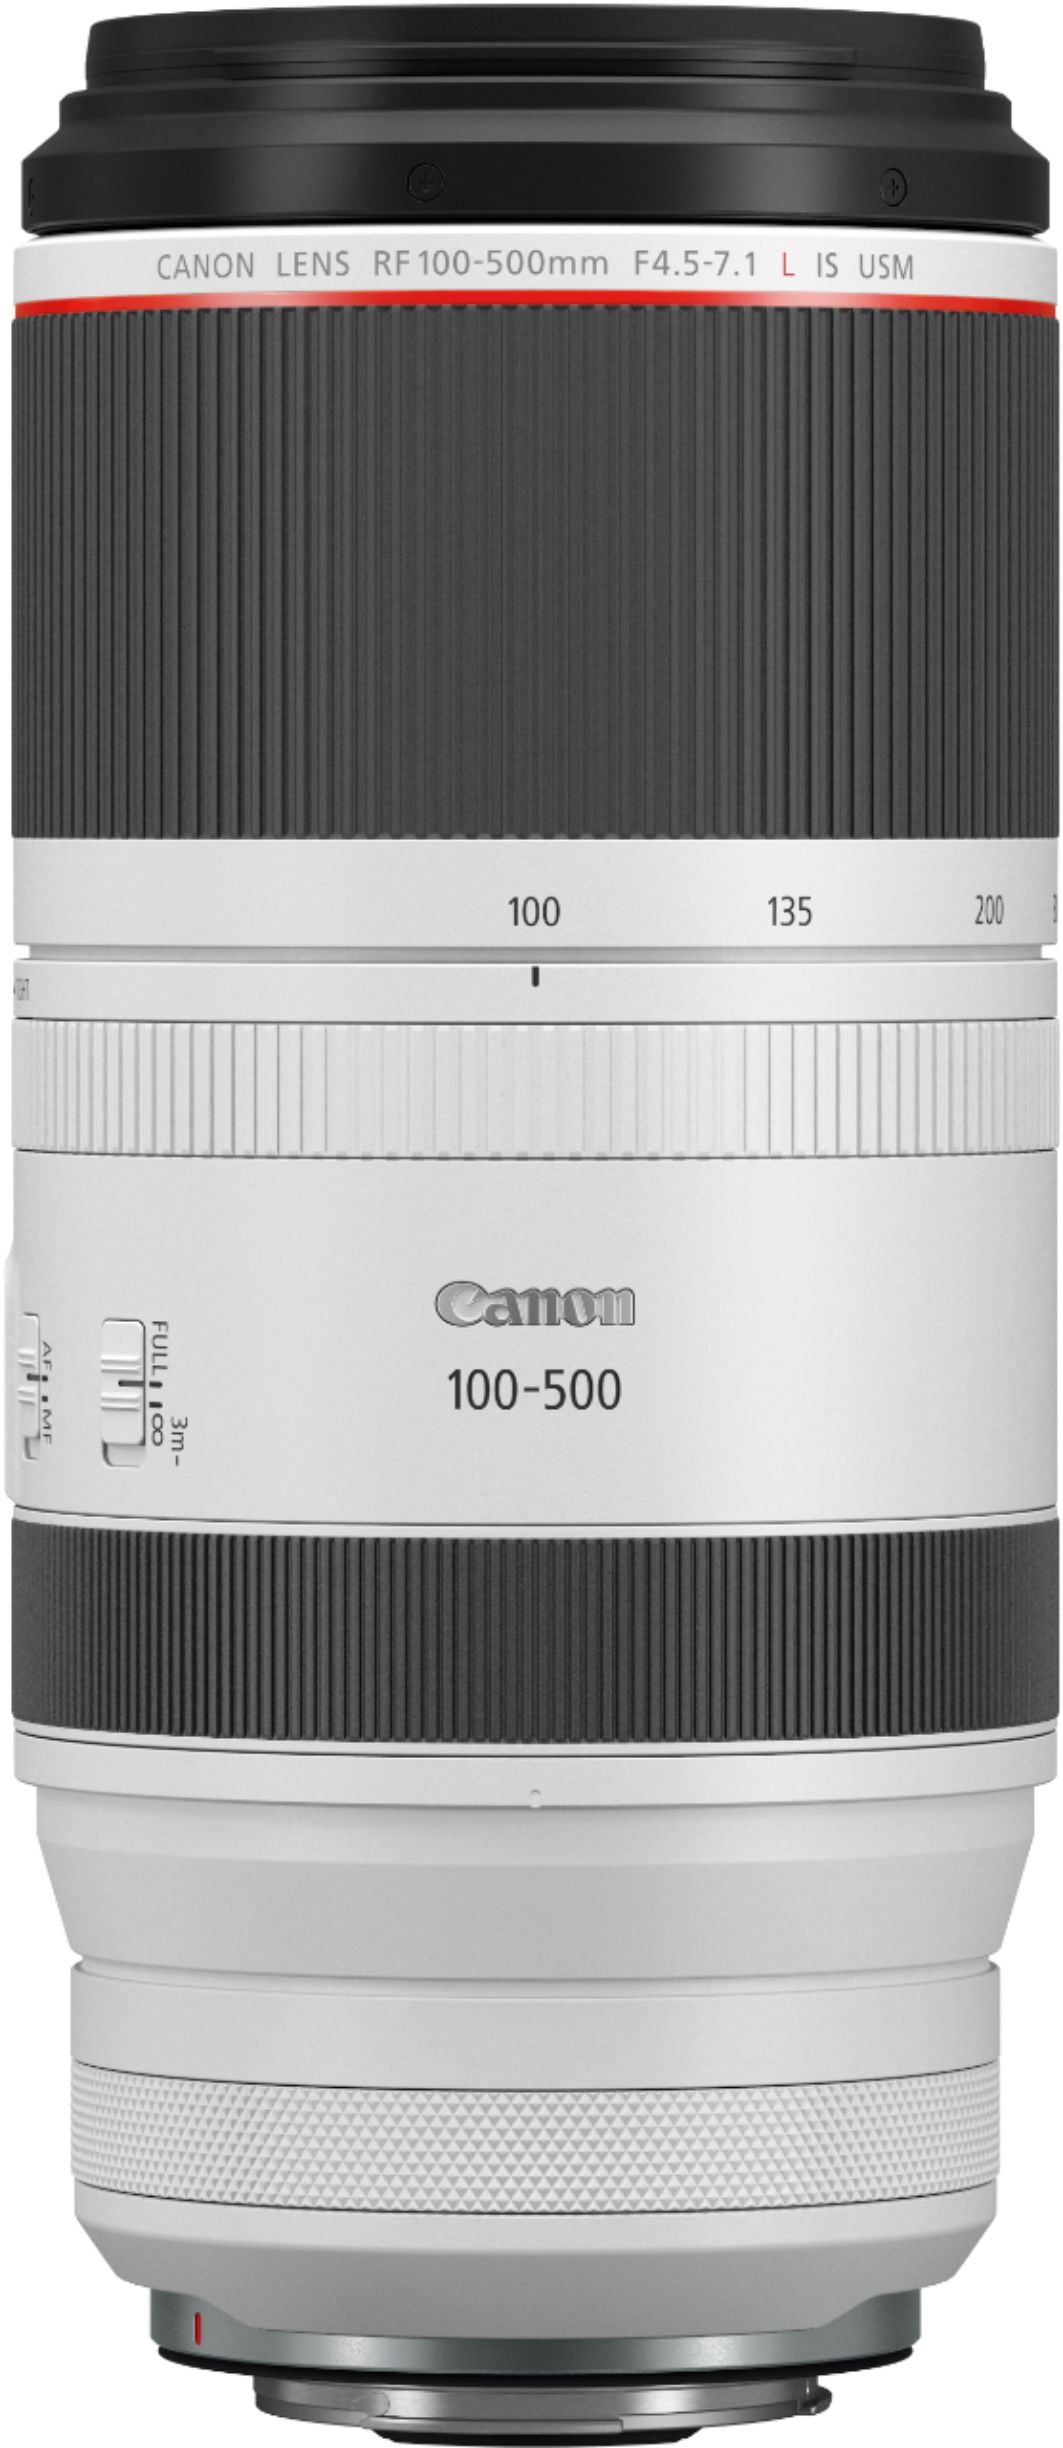 Canon - RF 100-500mm f/4.5-7.1 L IS USM Telephoto Zoom Lens - White_4